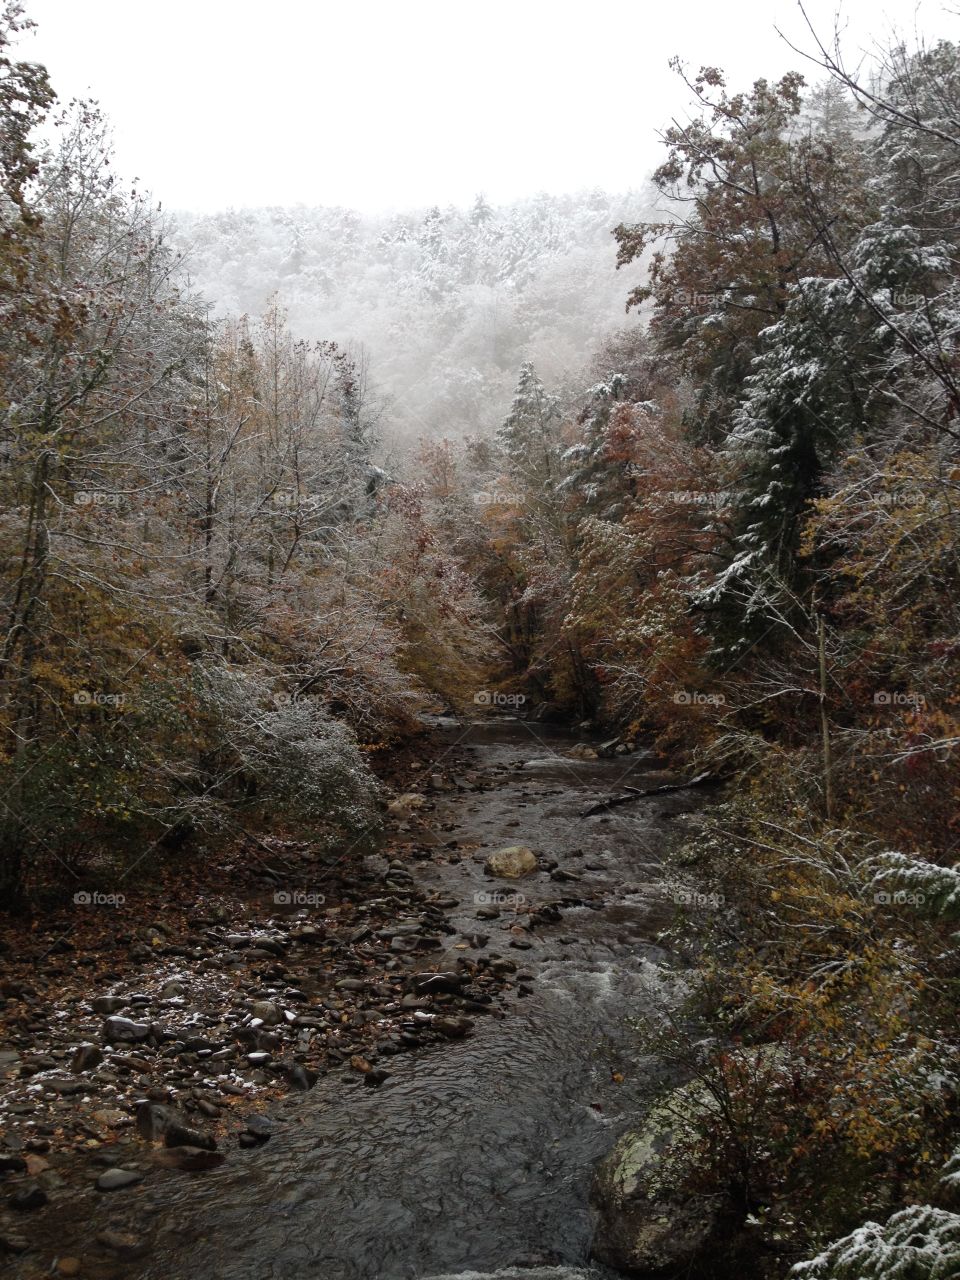 The beauty of two seasons in the Smokies.

